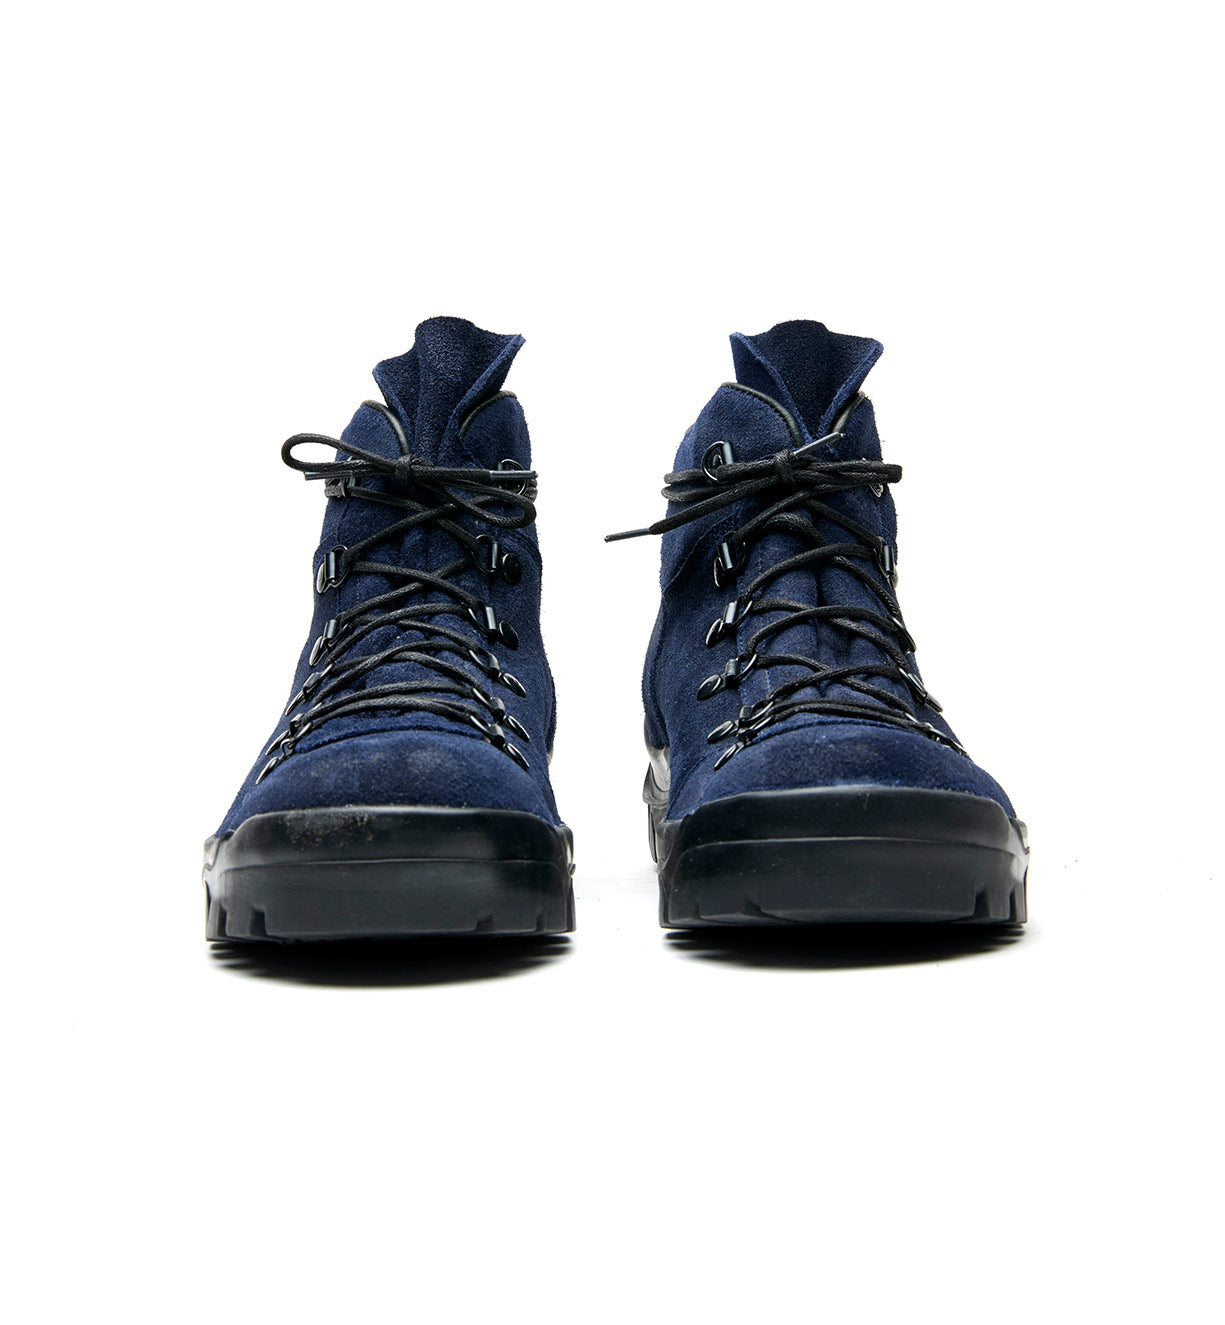 A pair of blue suede Broken Homme Weber boots with black laces.